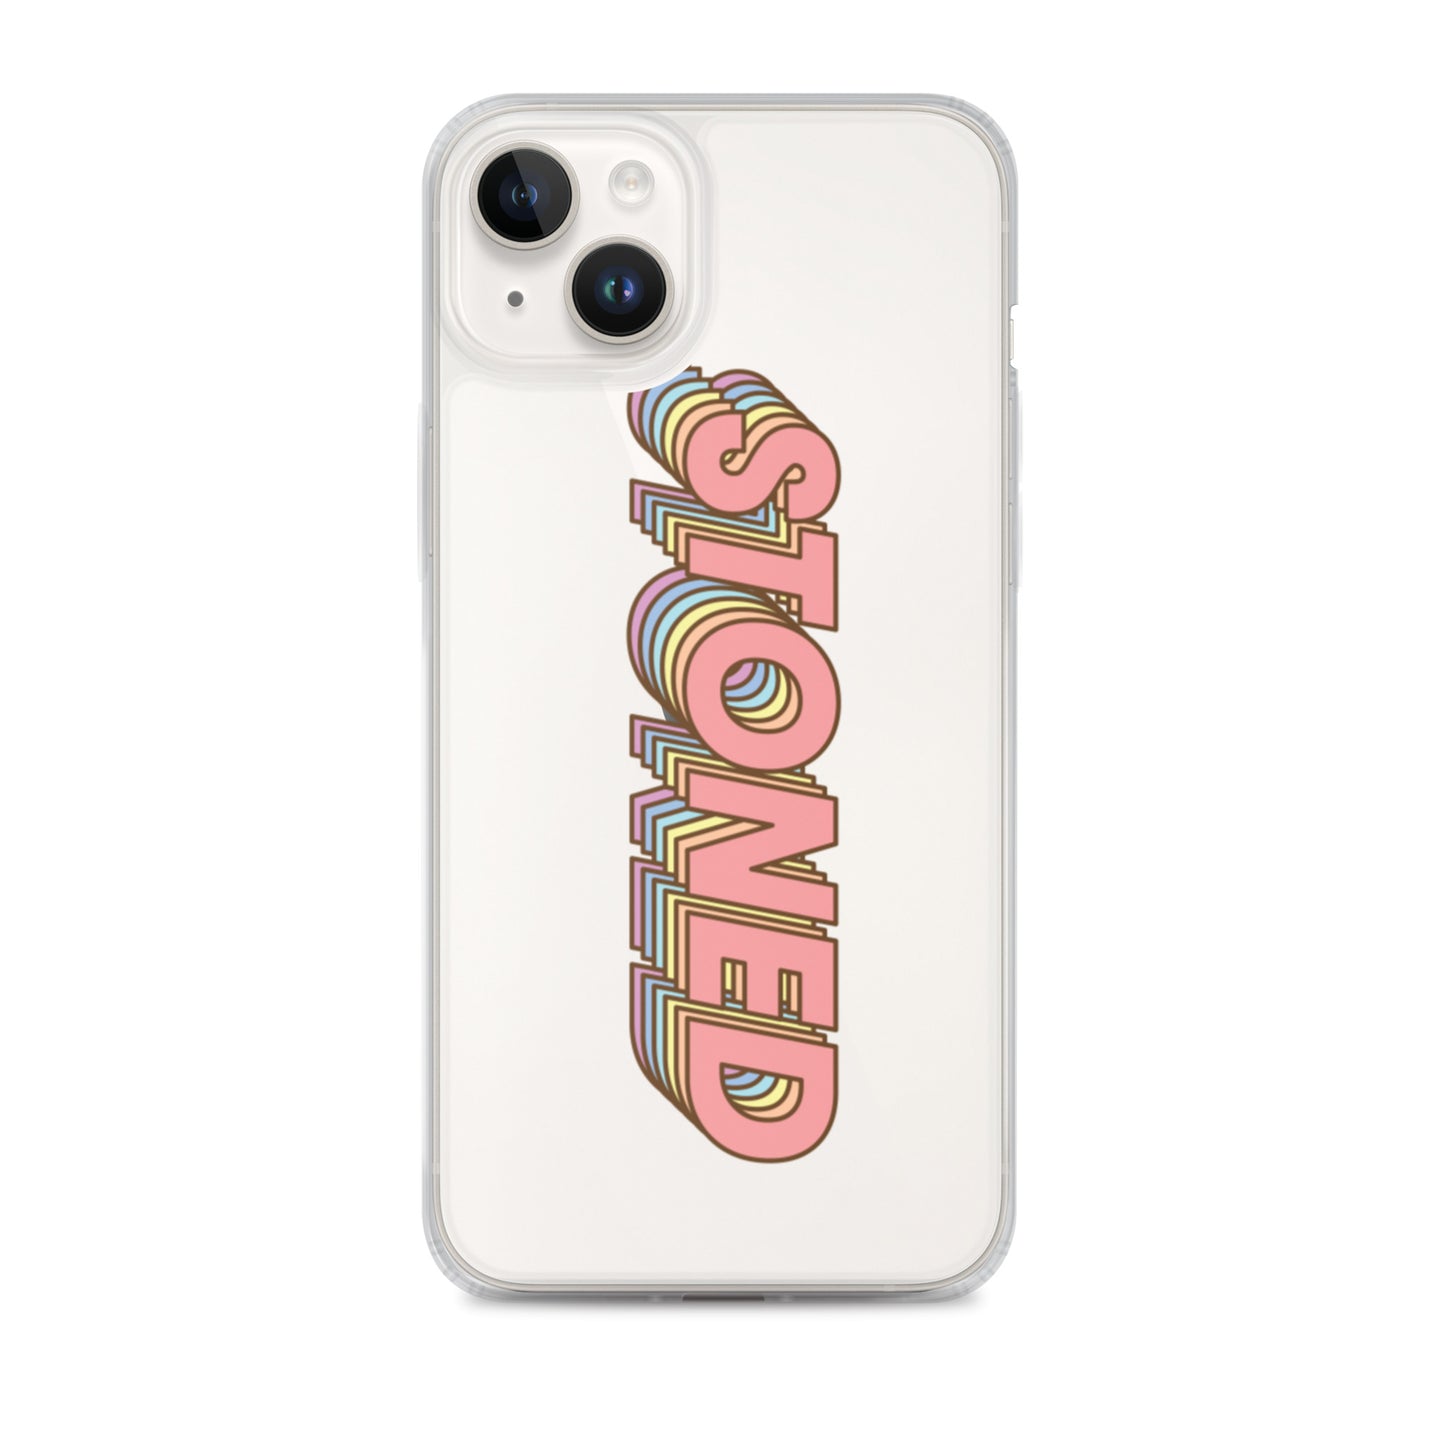 Stoned iPhone Case